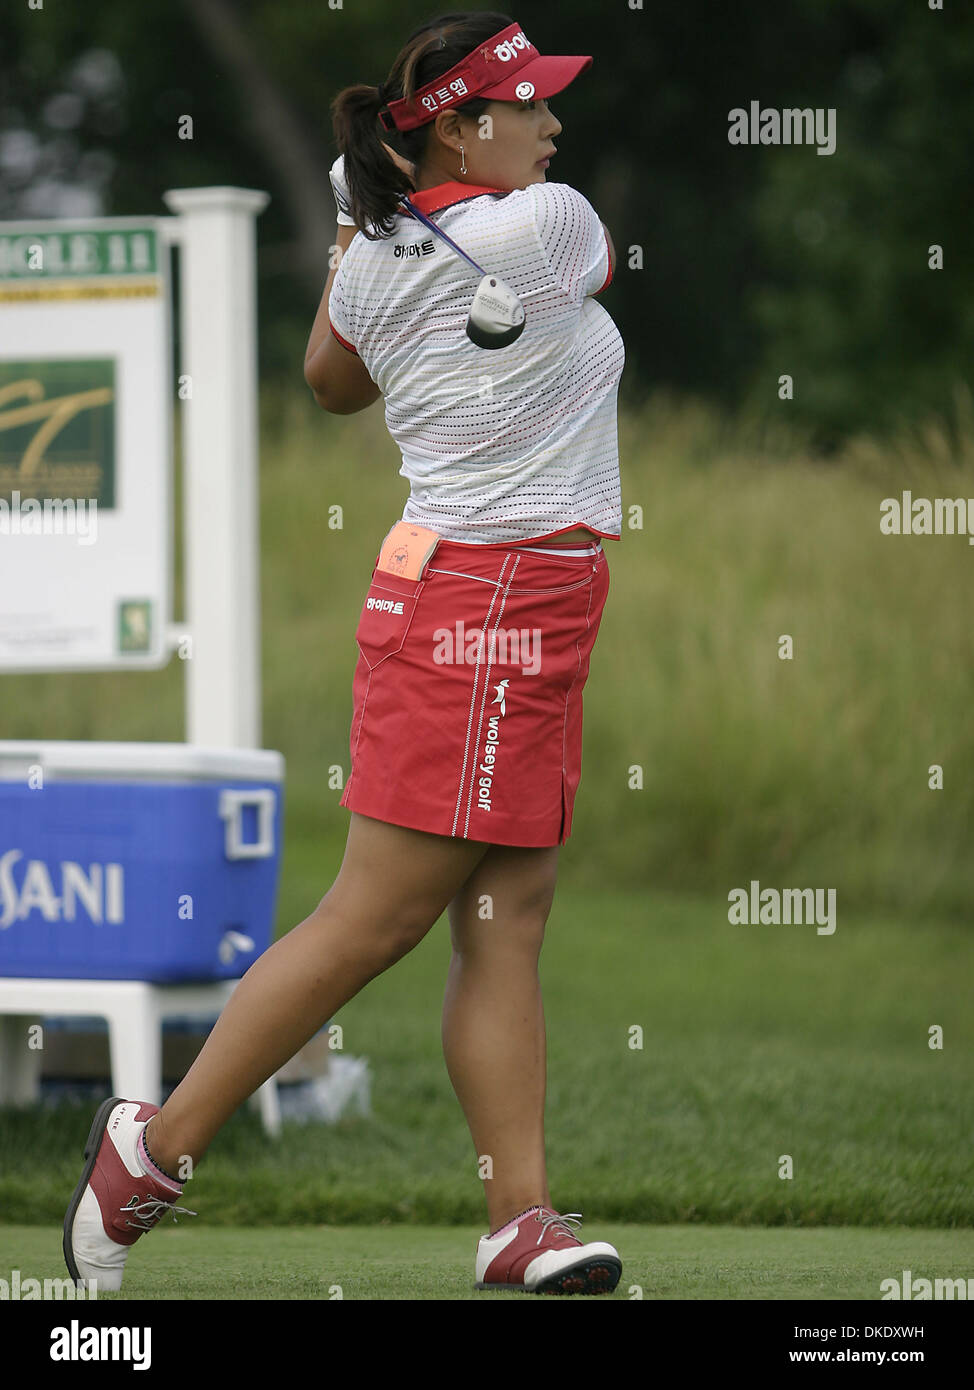 Jun 10, 2007 - Havre de Grace, Maryland, USA - Bulle Rock Golf Course: JEE YOUNG LEE of South Korea tees off on the 11th hole at Bulle Rock golf course in the final round of action in the McDonalds LPGA Championship. Lee finished the day at 2 under par, and the finished the tournament at 7 under par to tie for 10th place overall (Credit Image: © James Berglie/ZUMA Press) Stock Photo